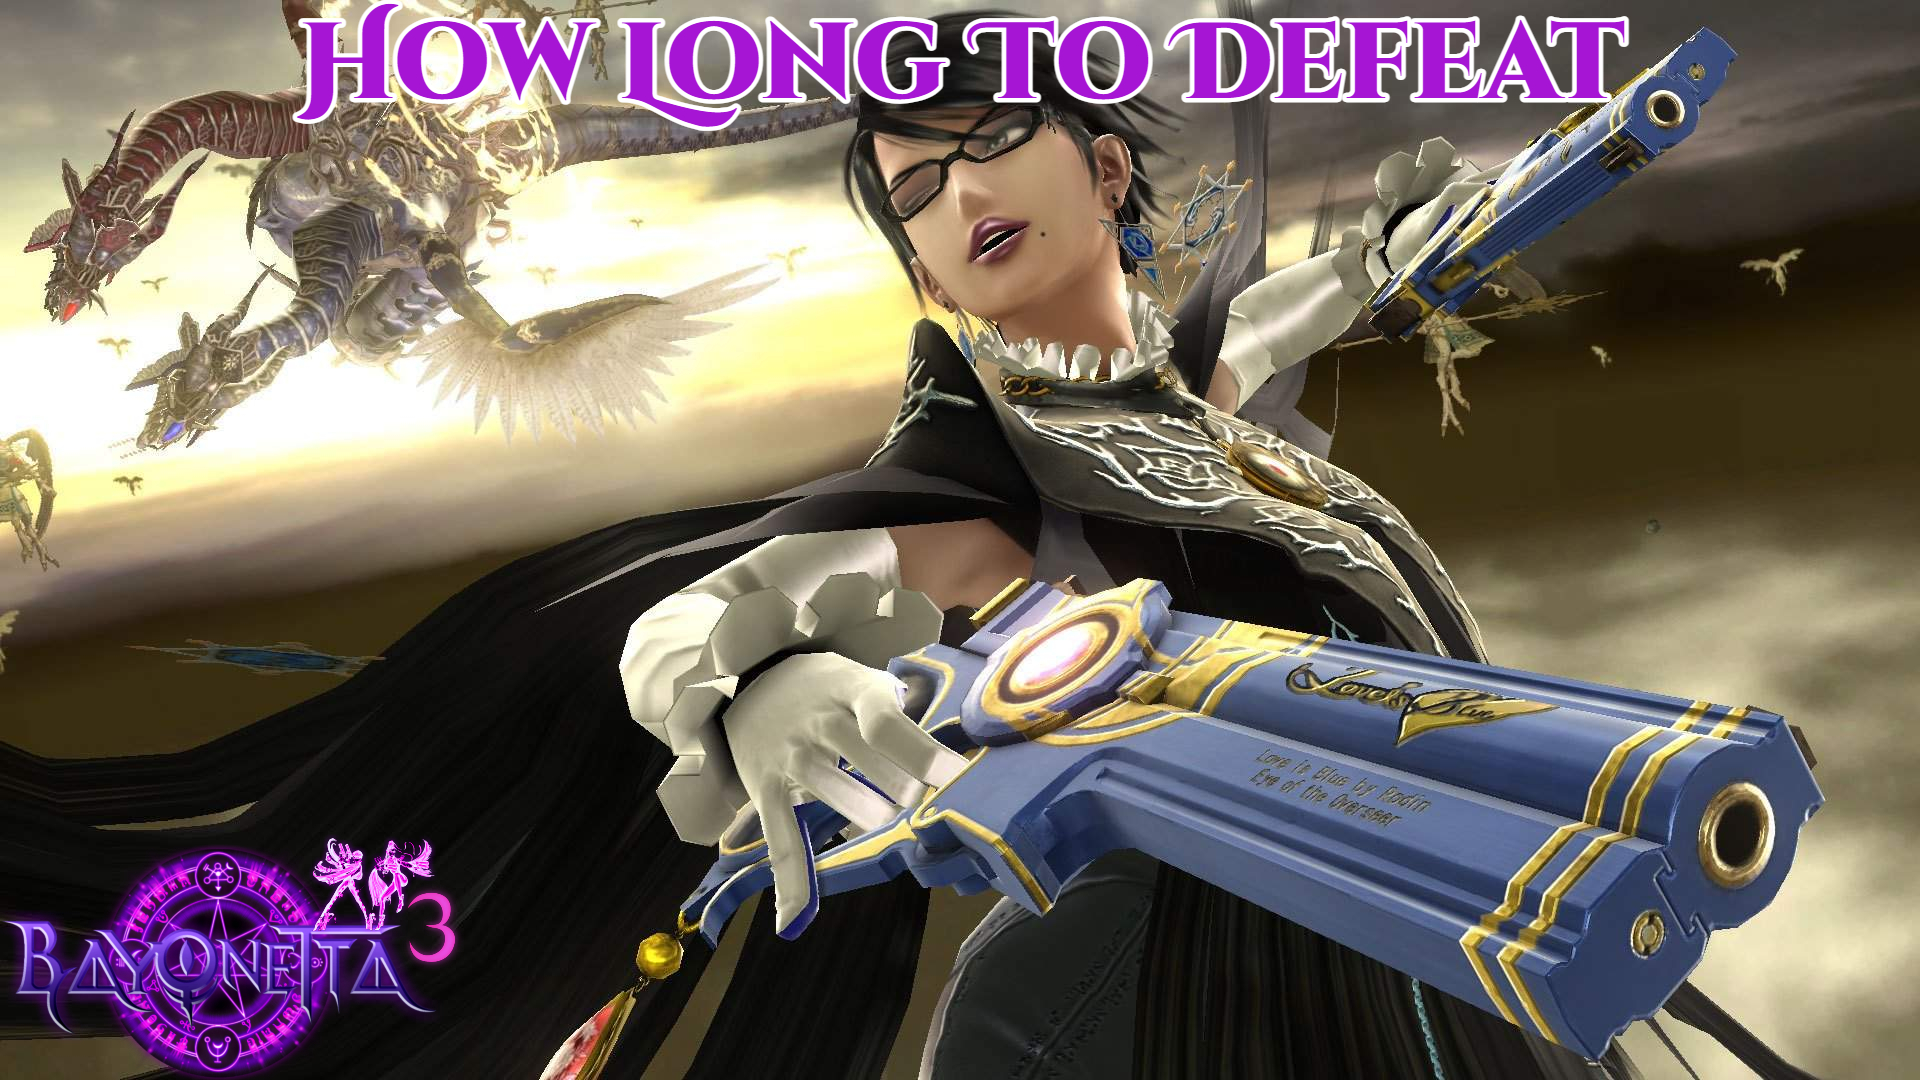 You are currently viewing How Long To Defeat Bayonetta 3